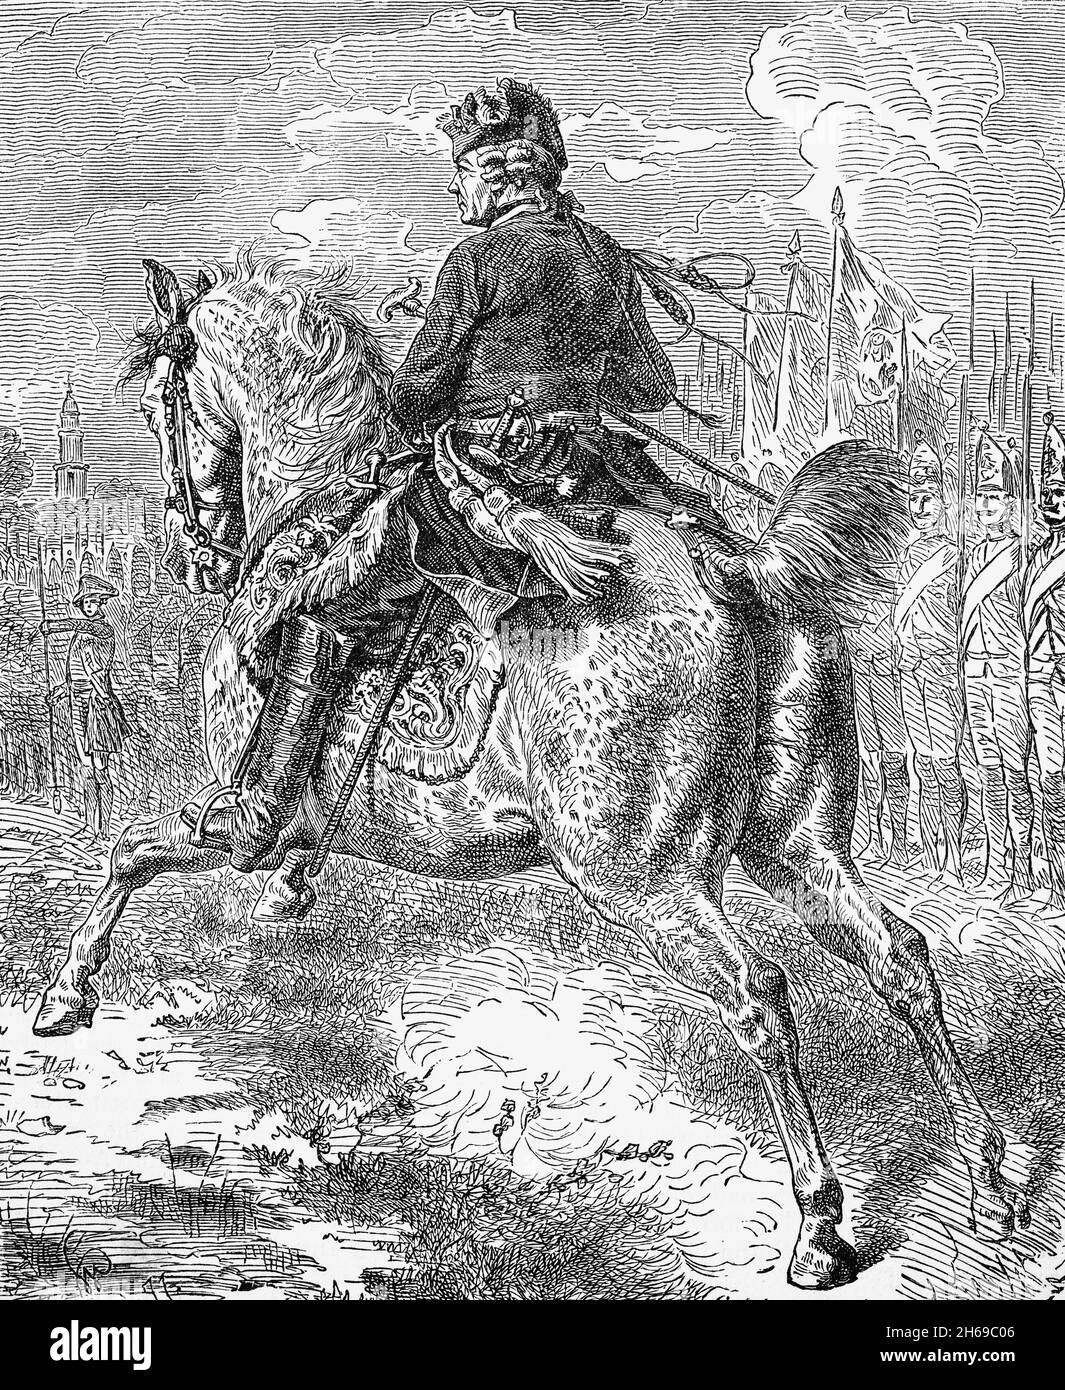 A late 19th Century illustration of Frederick the Great, AKA Frederick II (1712-1786), Prussian king from 1740 until his death in 1772, riding among his troops. His most significant accomplishments include his military successes in the Silesian wars, his re-organisation of the Prussian Army, the First Partition of Poland, and his patronage of the arts and the Enlightenment. He declared himself King of Prussia after annexing Polish Prussia from the Polish–Lithuanian Commonwealth in 1772. Prussia greatly increased its territories and became a major military power in Europe under his rule. Stock Photo